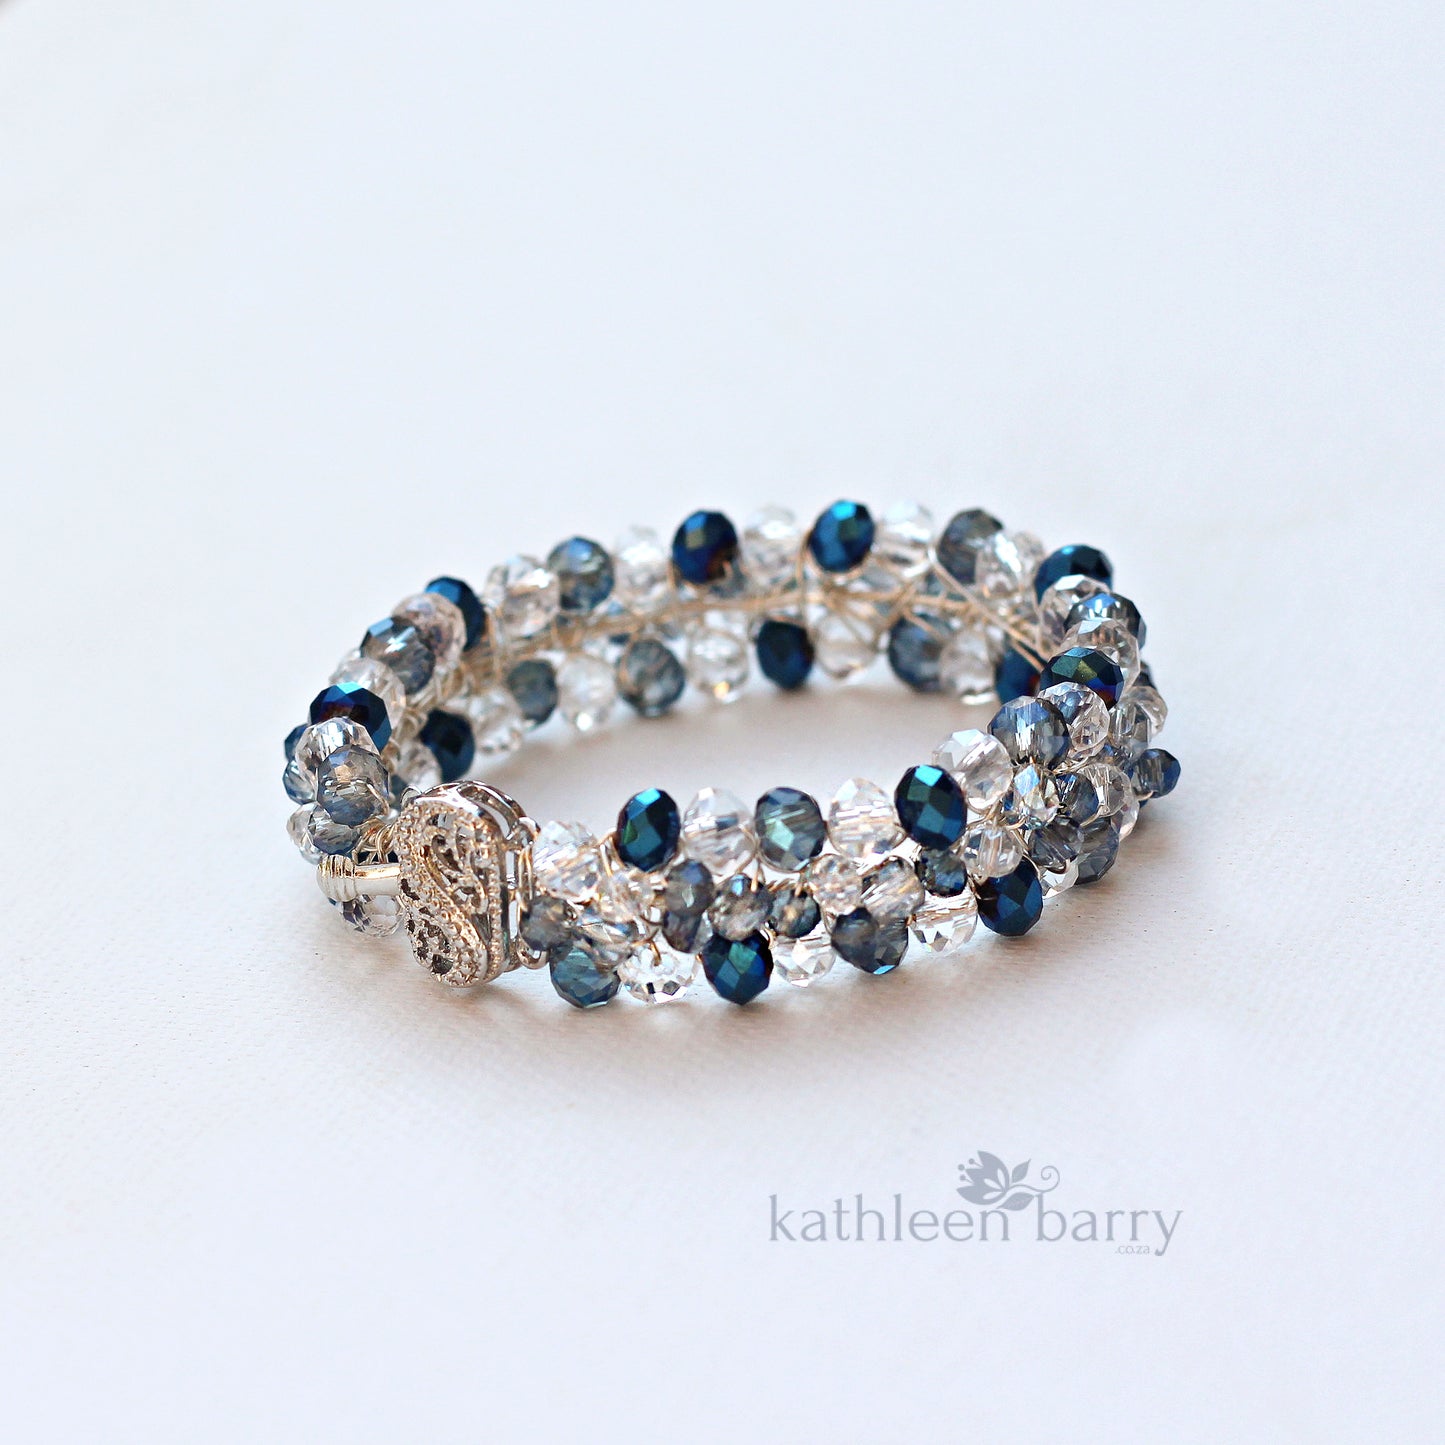 Michelle Crystal Bracelet - Crystal color options available